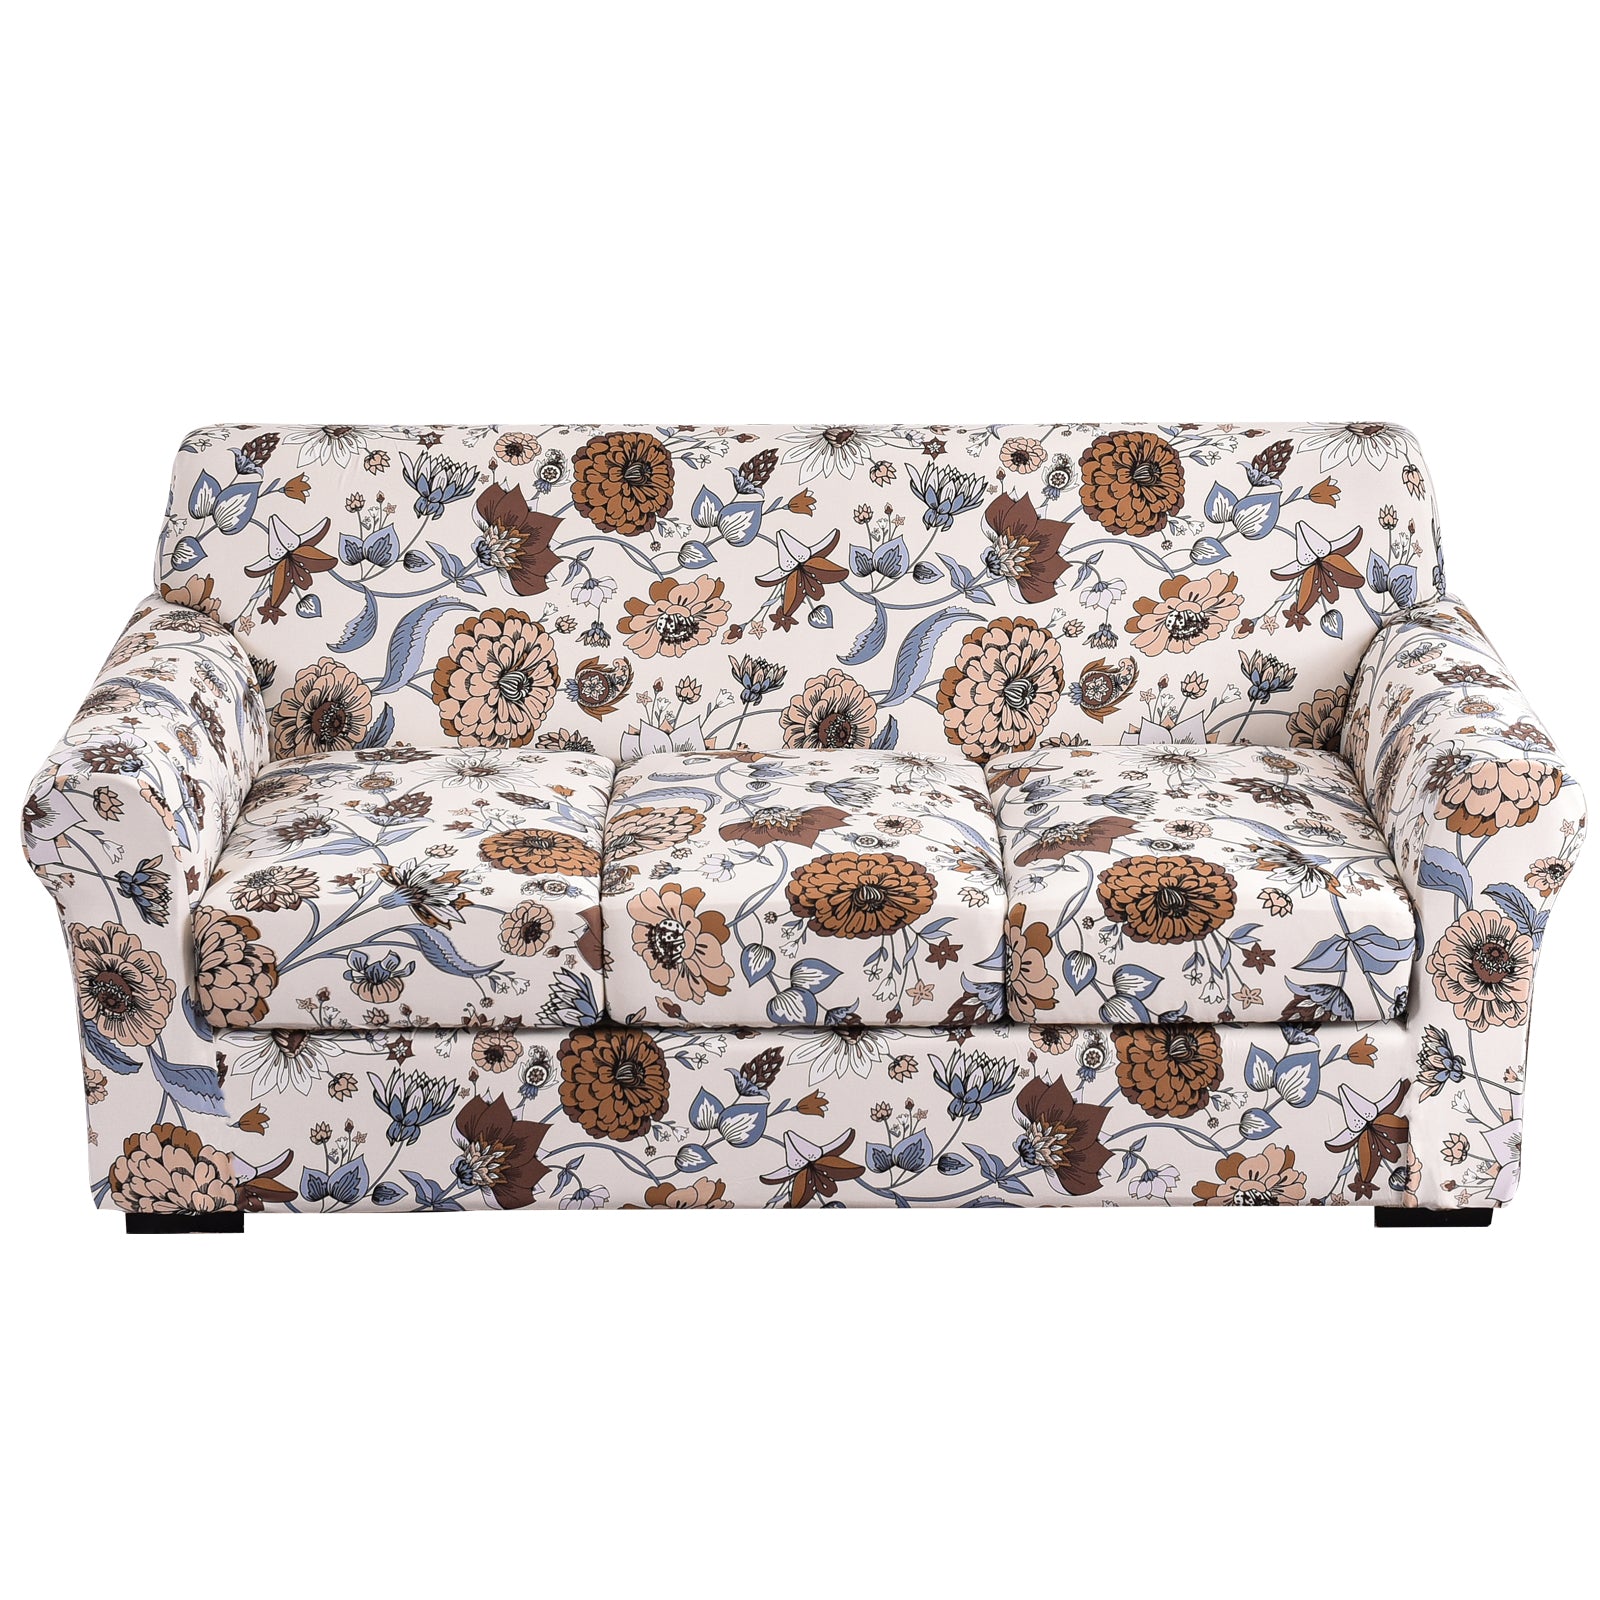 Printed Couch Covers for Three Seater Sofas - Floral Sofa Covers with Separate Pillow Shams, Stretch Sofa Slipcovers, Washable Furniture Protectors